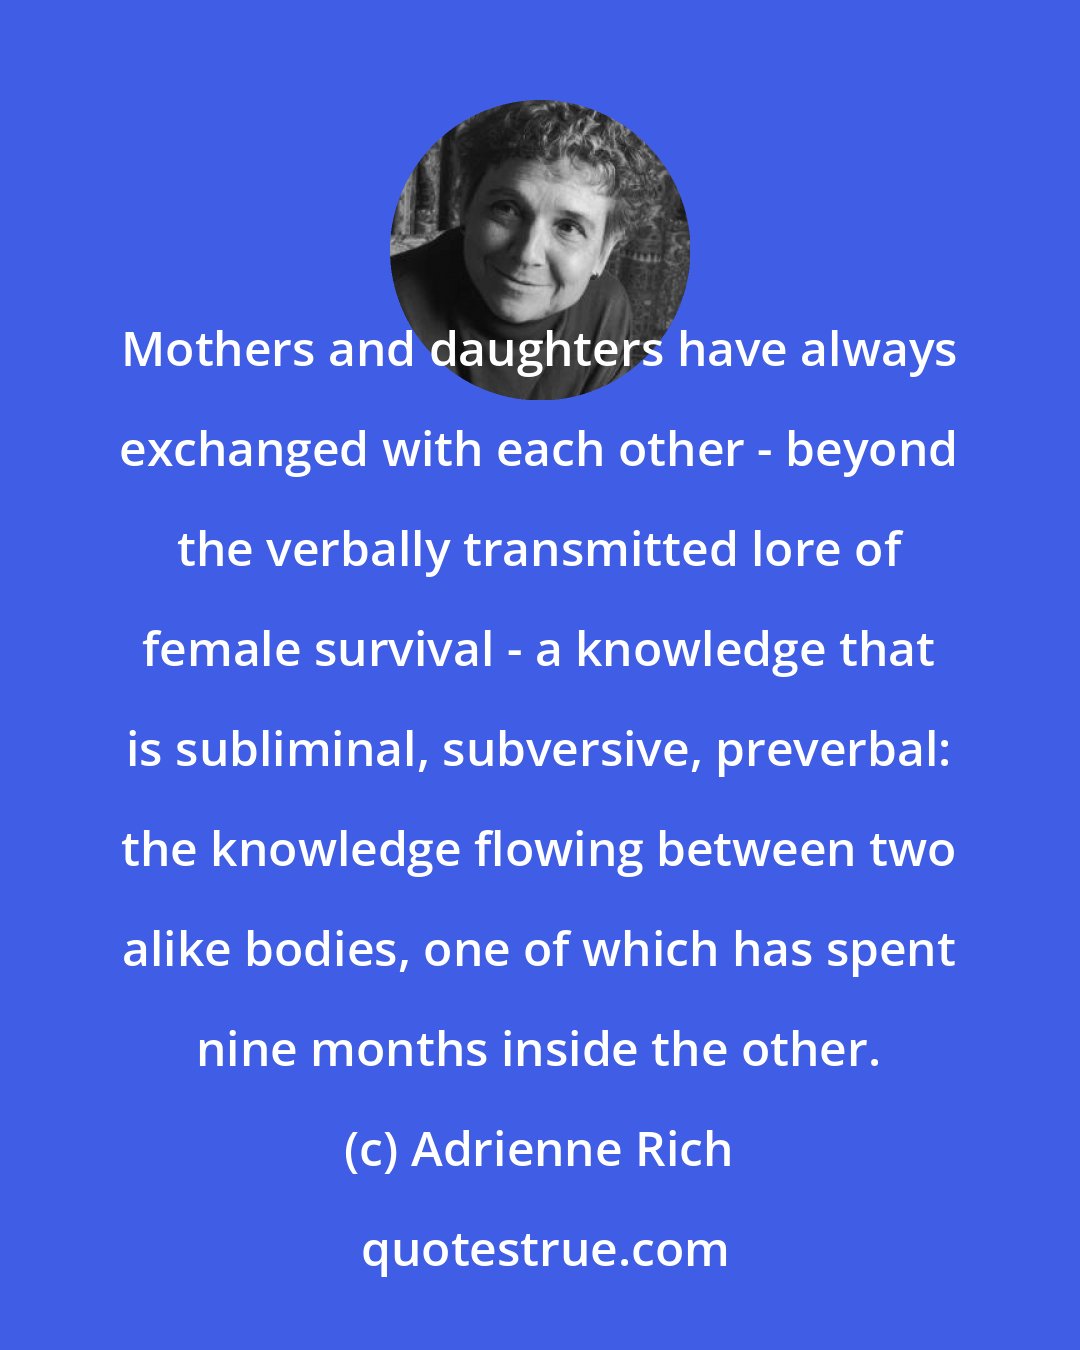 Adrienne Rich: Mothers and daughters have always exchanged with each other - beyond the verbally transmitted lore of female survival - a knowledge that is subliminal, subversive, preverbal: the knowledge flowing between two alike bodies, one of which has spent nine months inside the other.